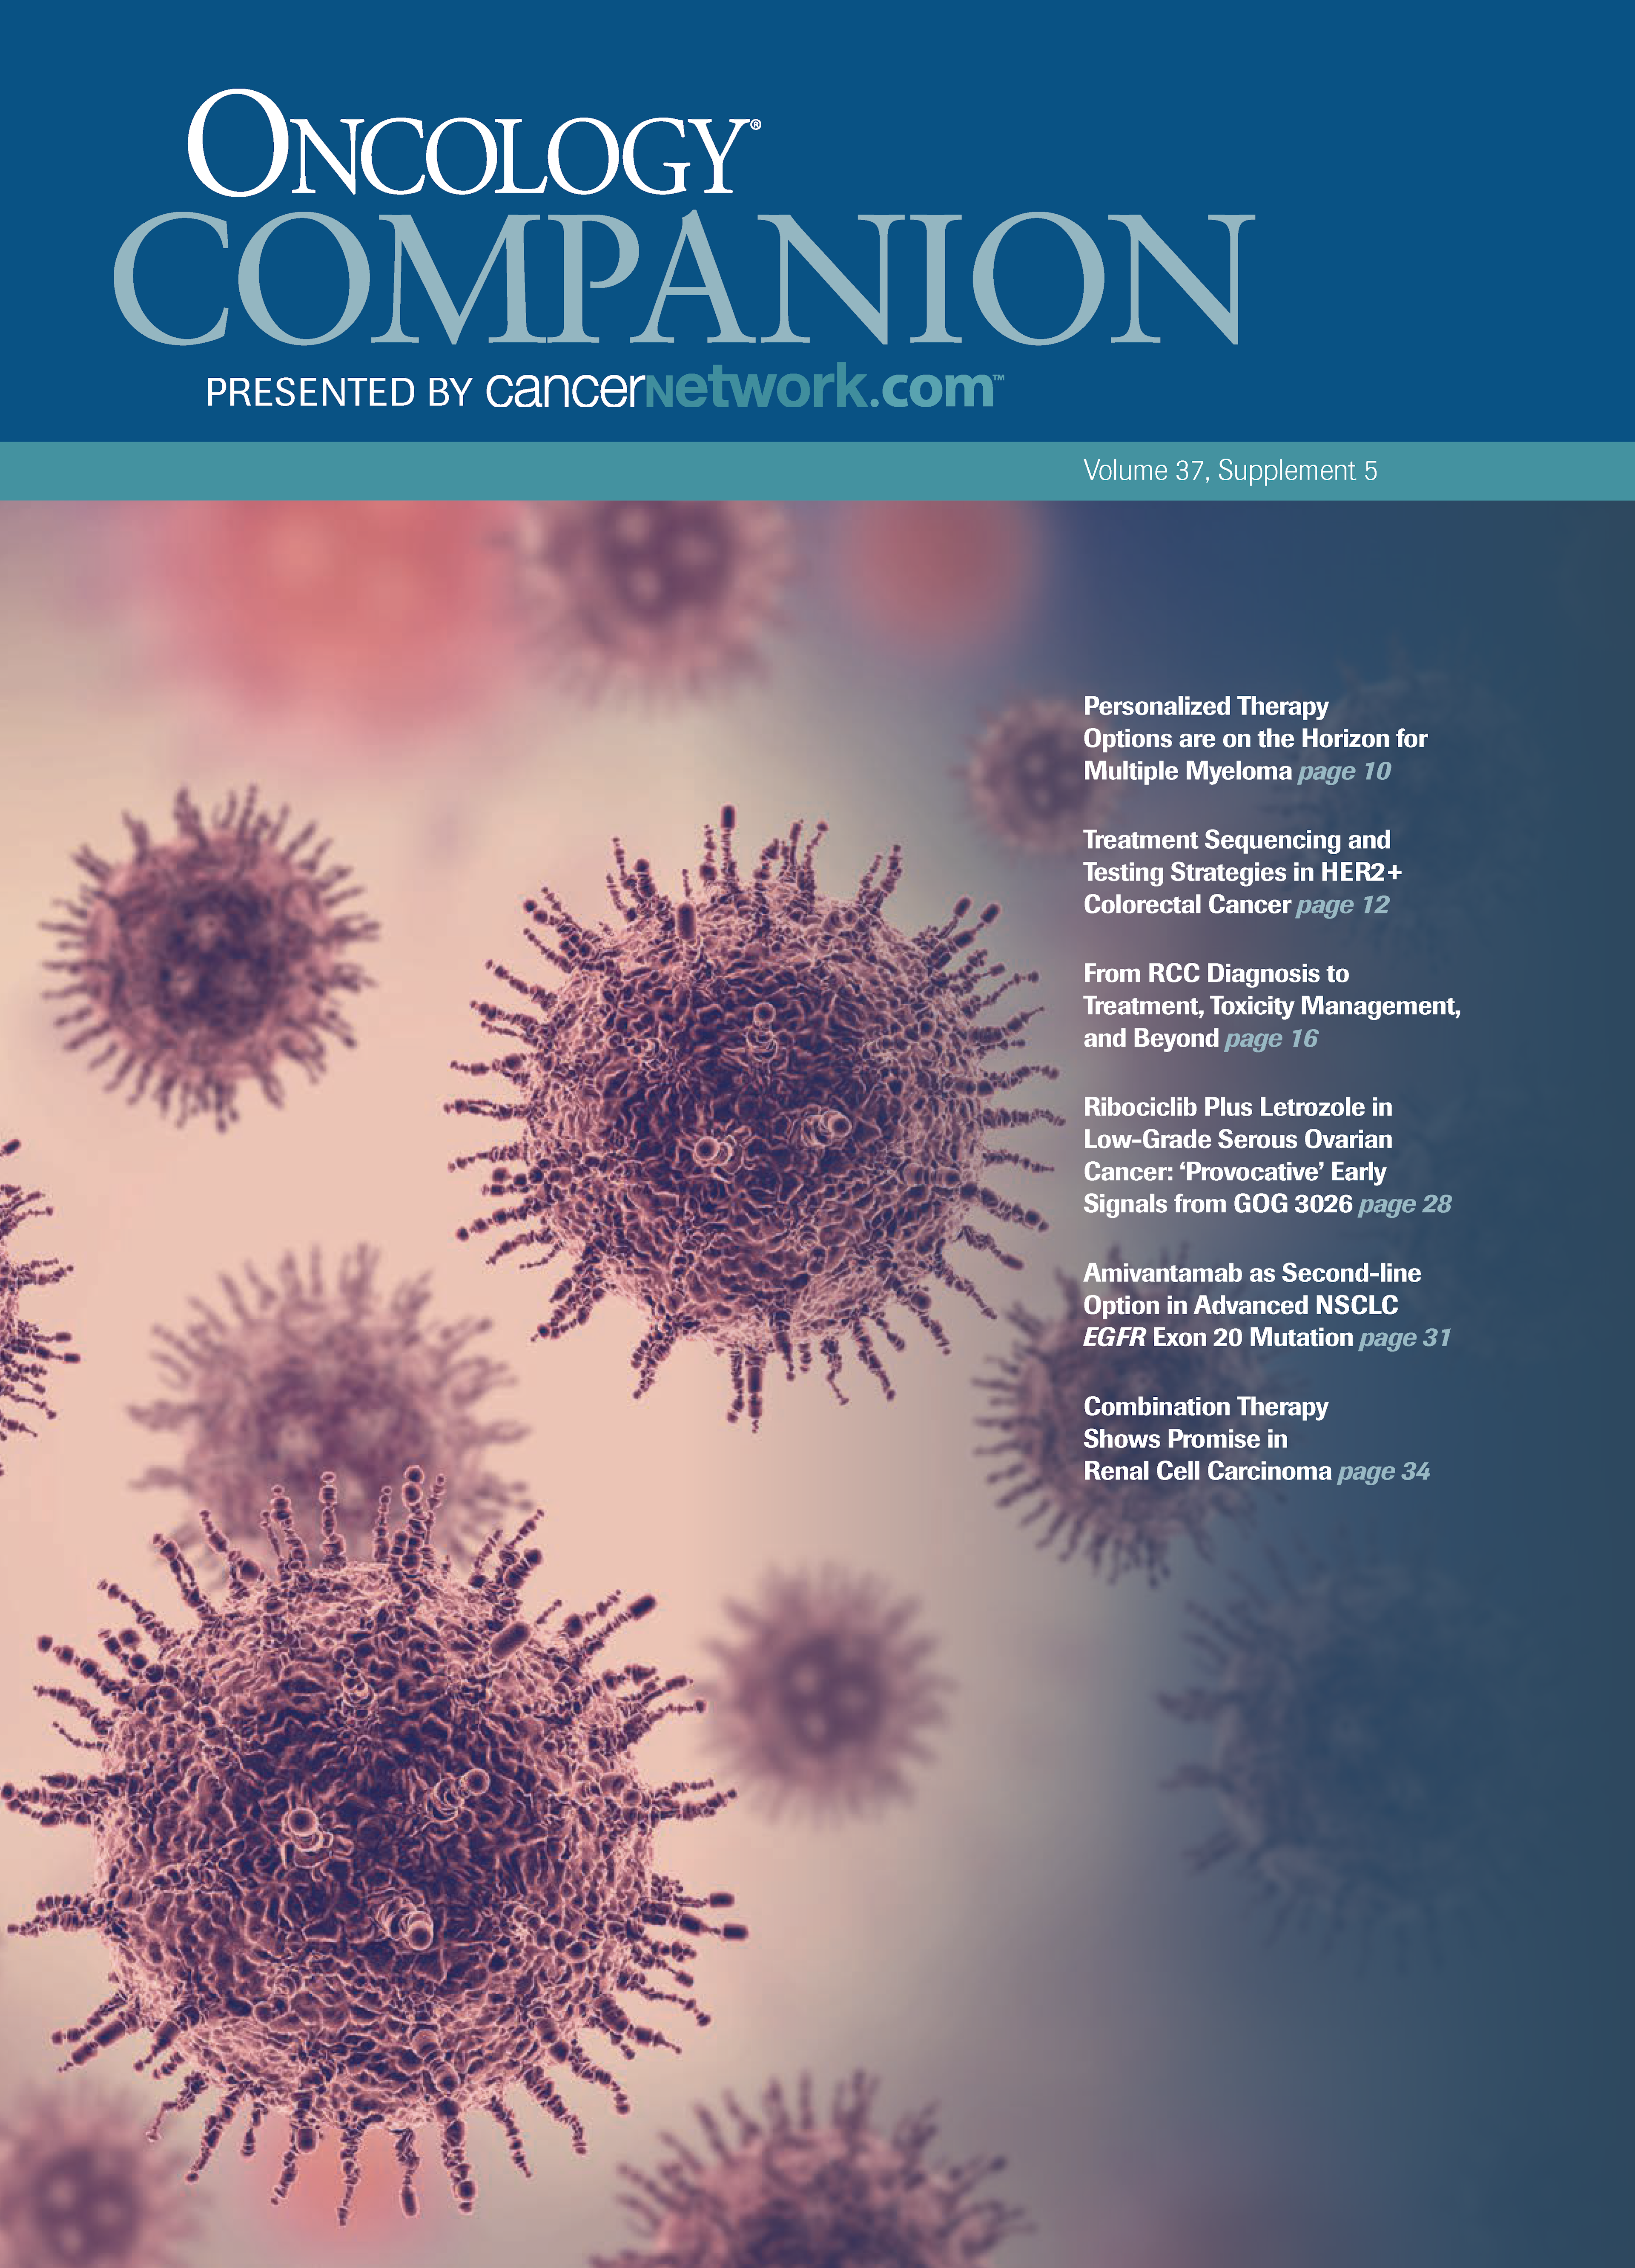 ONCOLOGY® Companion, Volume 37, Supplement 6